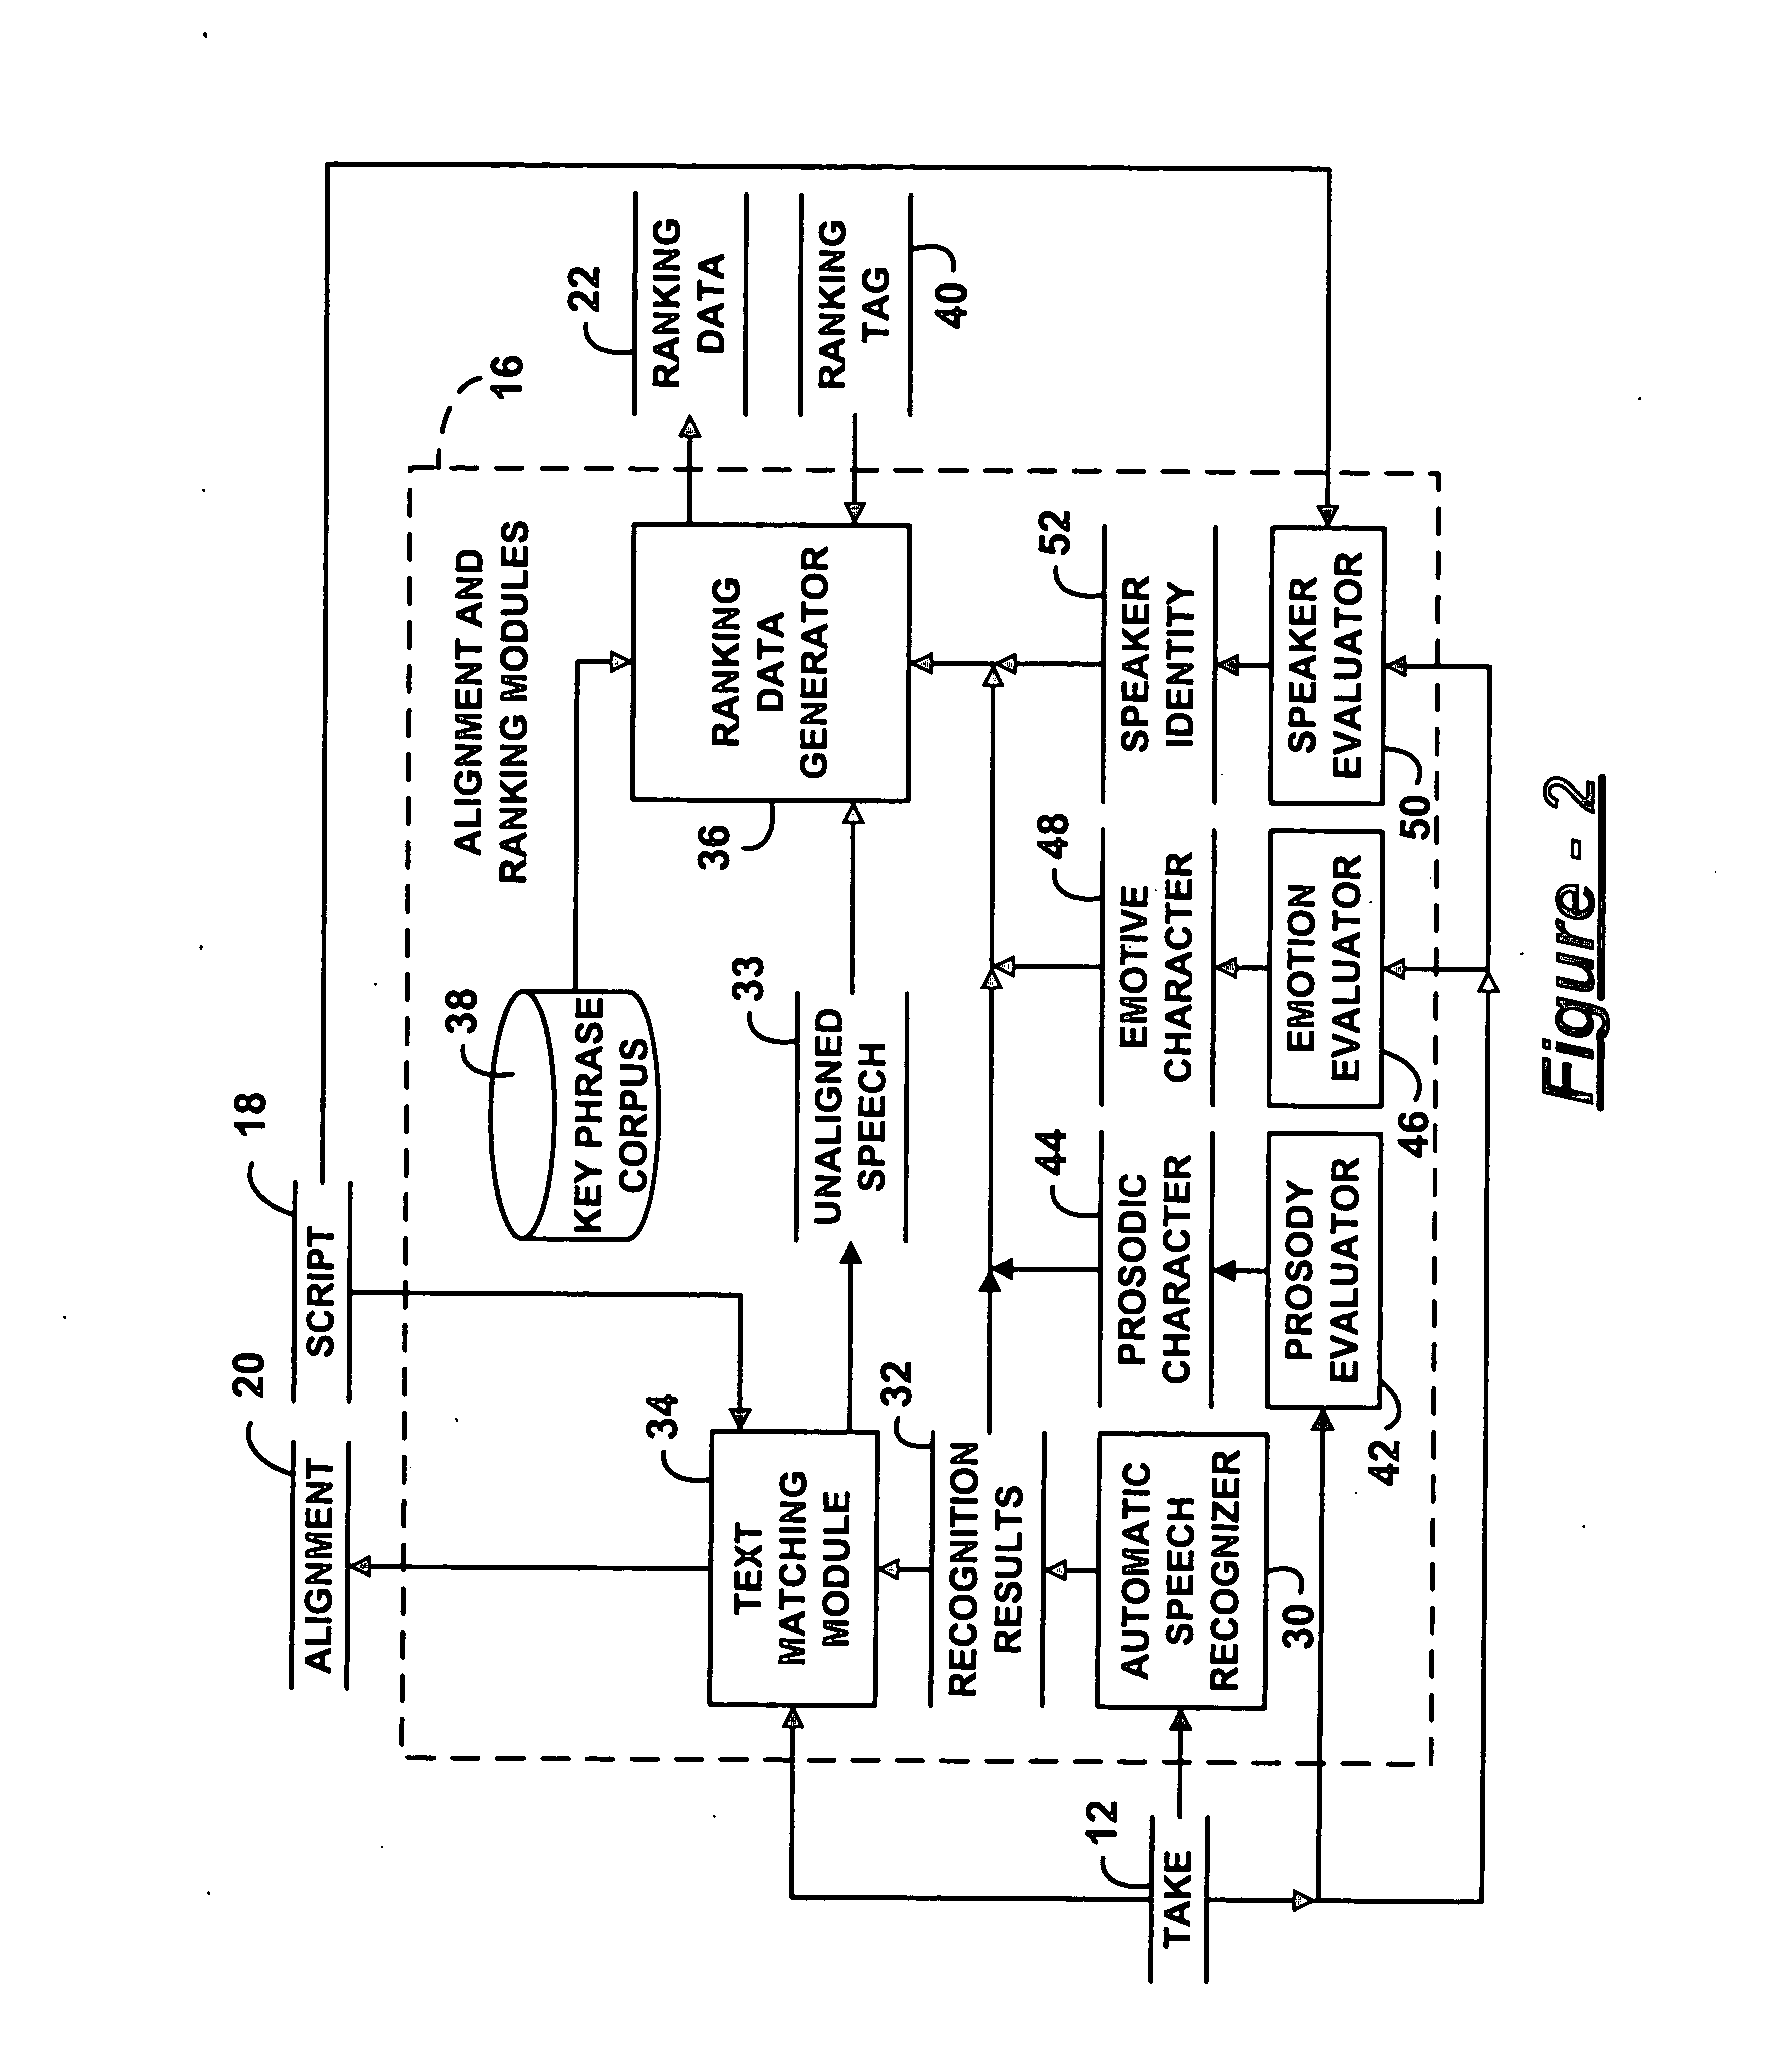 Media production system using time alignment to scripts